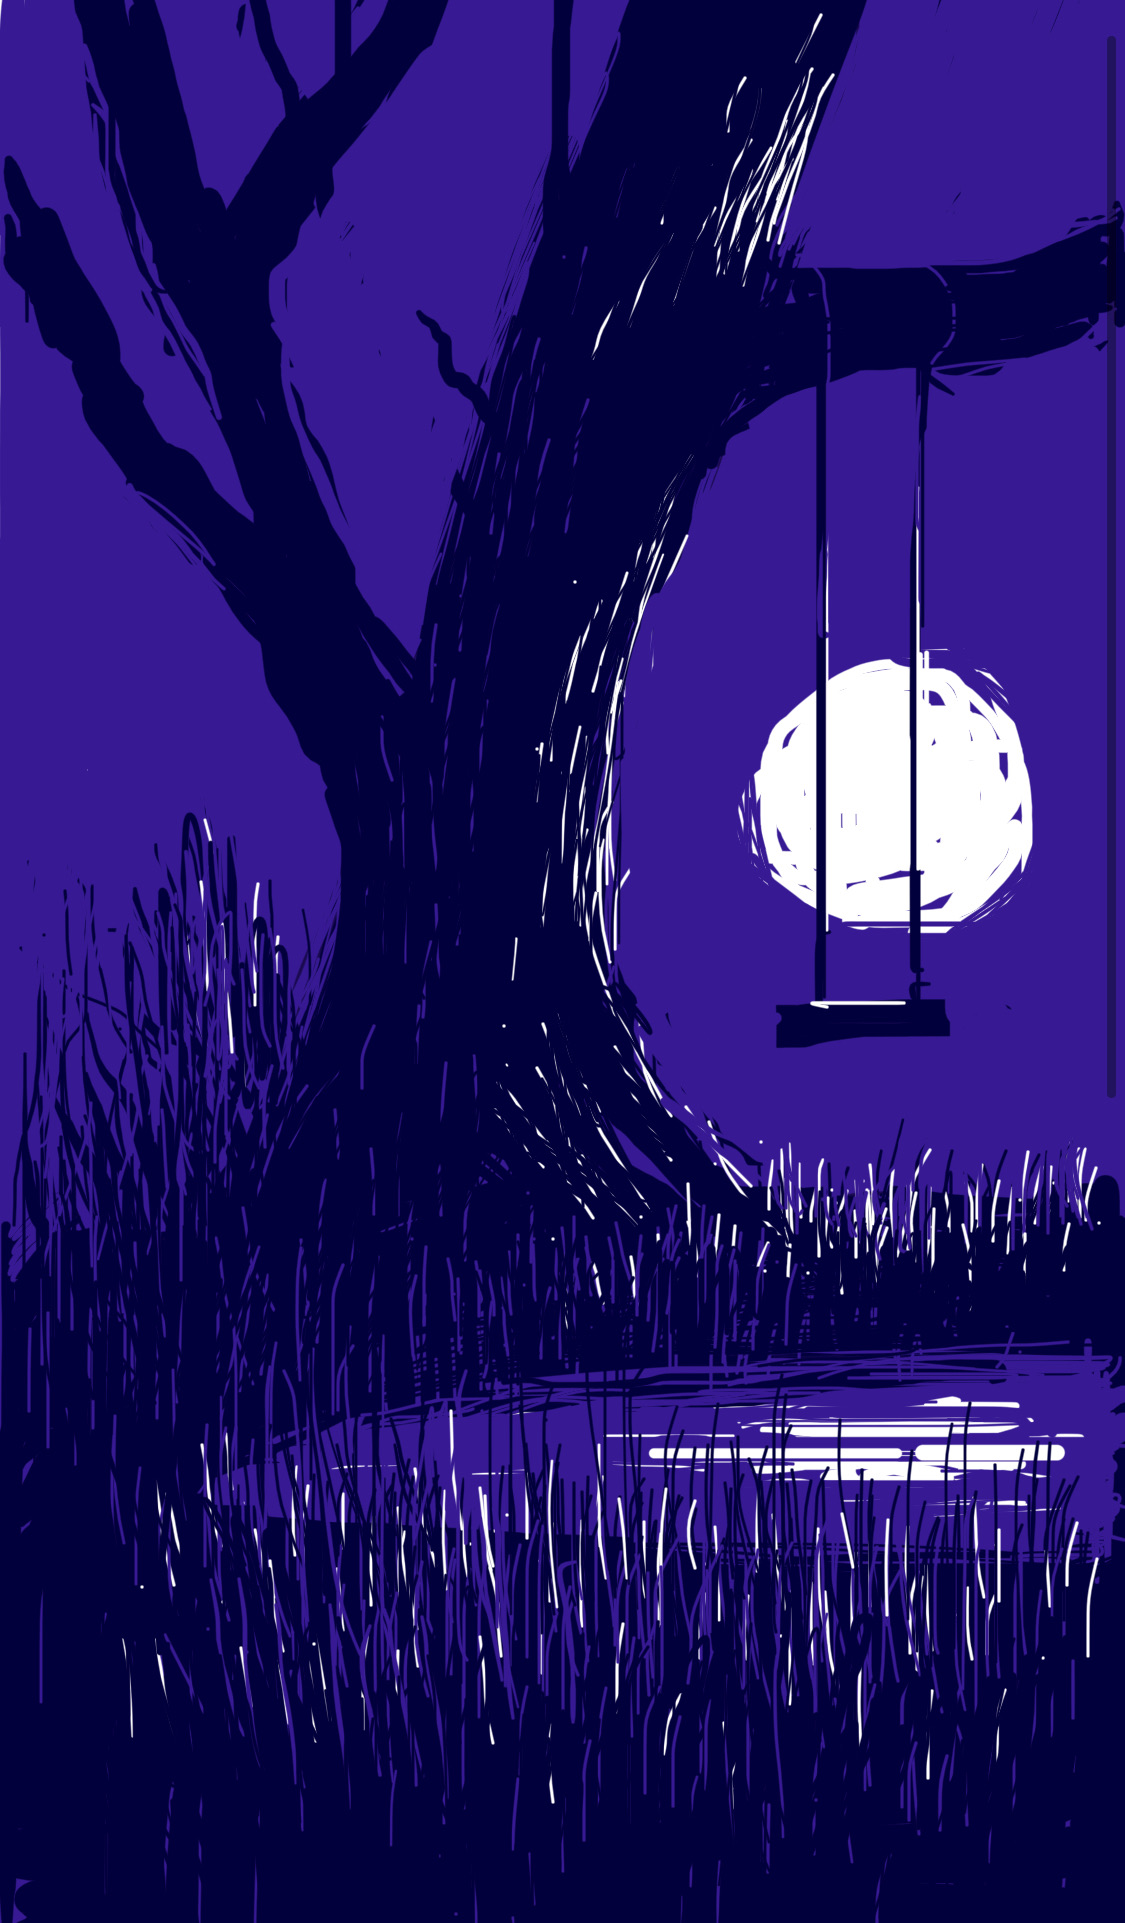 A swing hangs from a tree at night, a small pond nearby. The full moon reflects eerily in the pond.